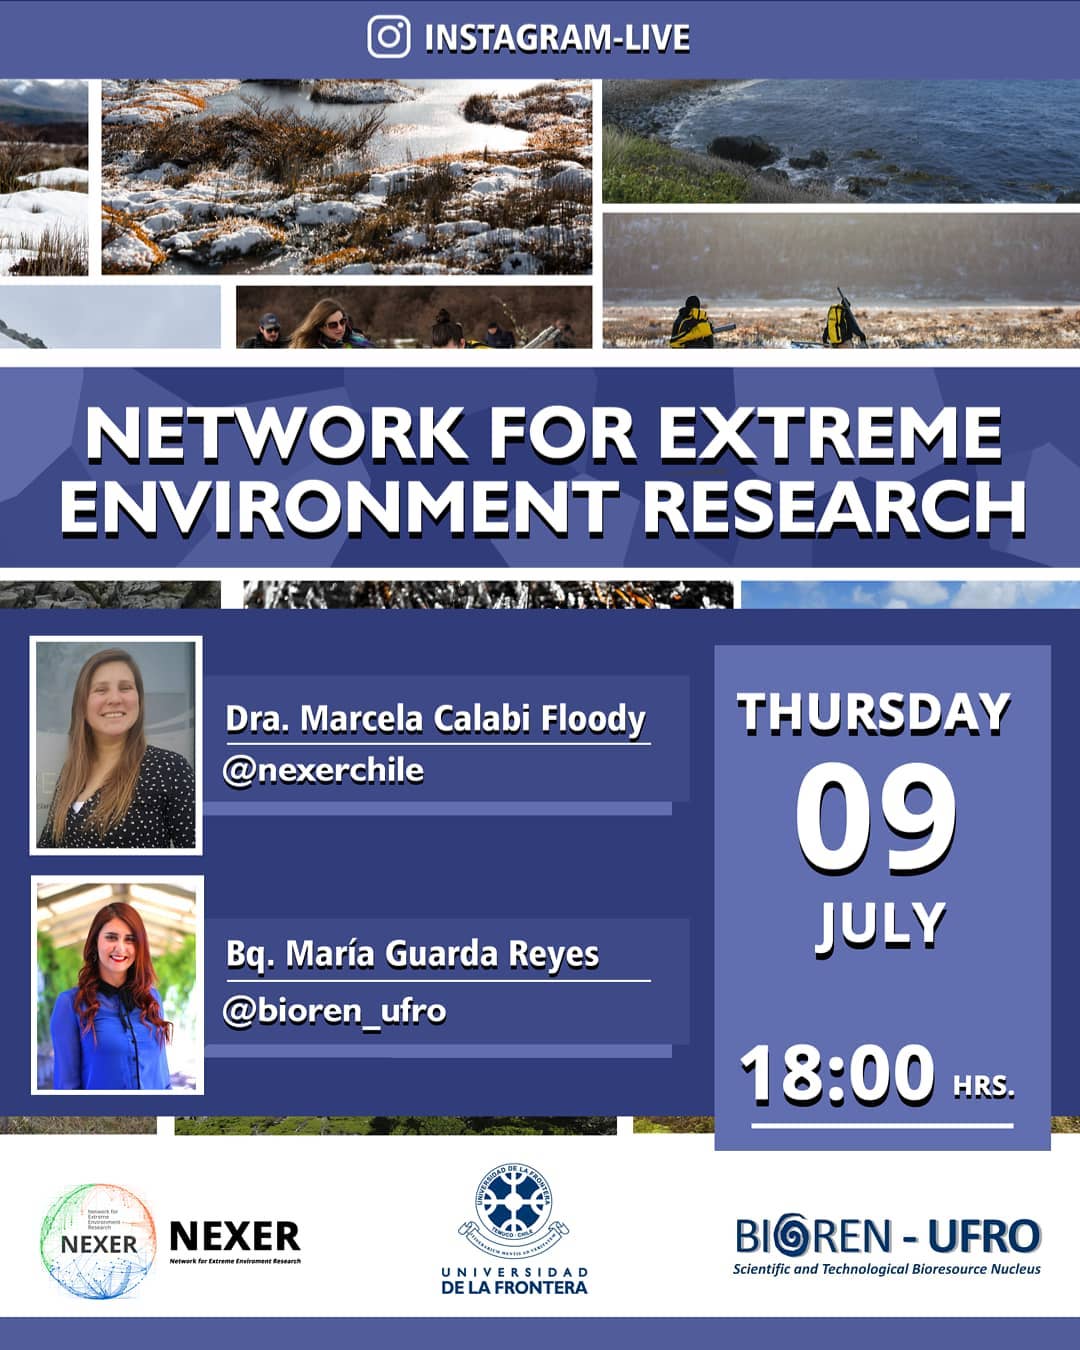 Network for Extreme Environments Research featuring Dr. Marcela Calabi